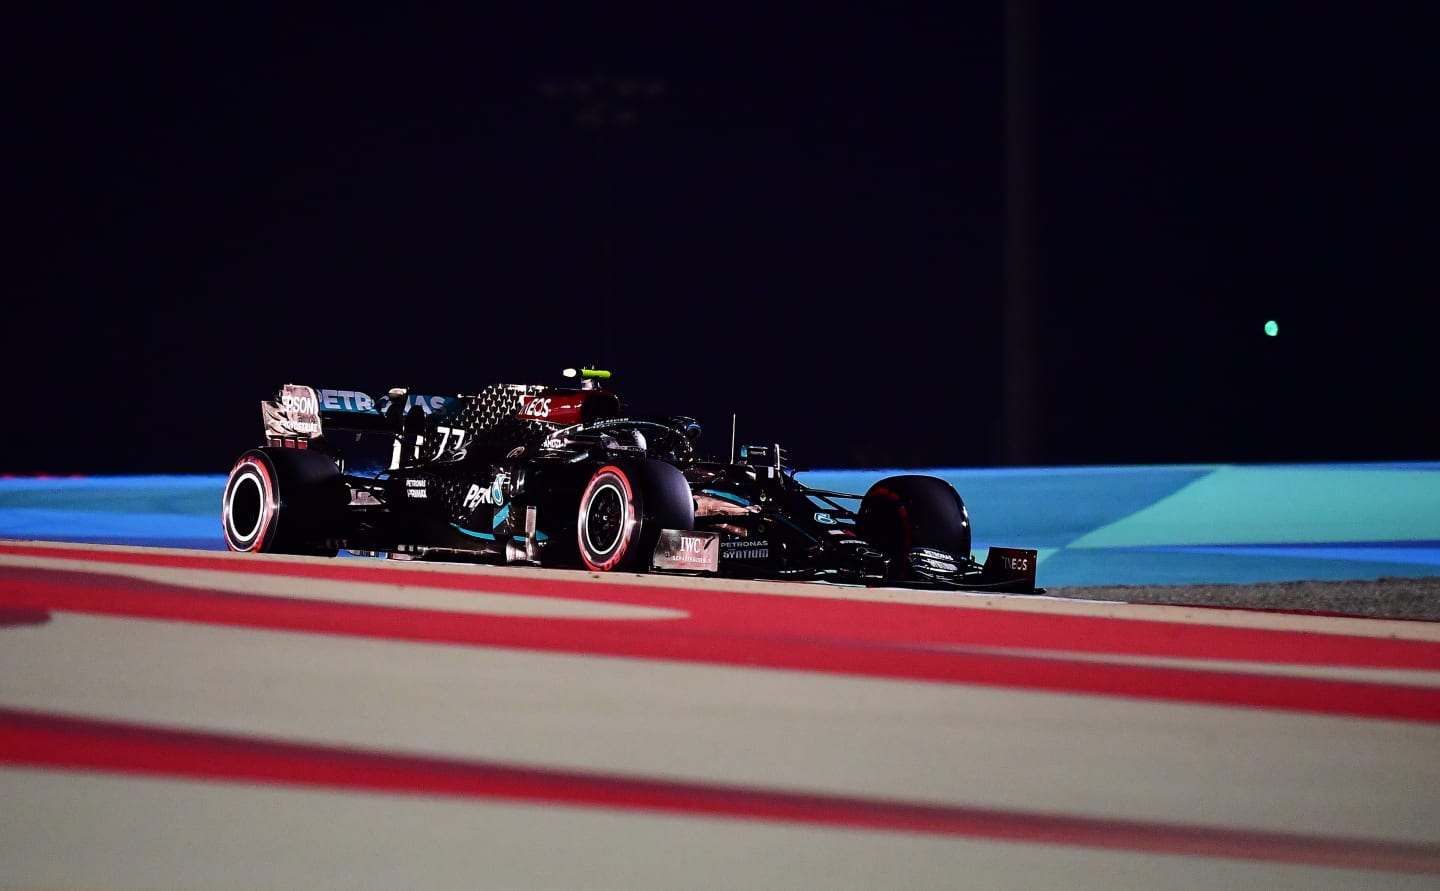 BAHRAIN, BAHRAIN - NOVEMBER 28: Valtteri Bottas of Finland driving the (77) Mercedes AMG Petronas F1 Team Mercedes W11 on track during qualifying ahead of the F1 Grand Prix of Bahrain at Bahrain International Circuit on November 28, 2020 in Bahrain, Bahrain. (Photo by Giuseppe Cacace - Pool/Getty Images)